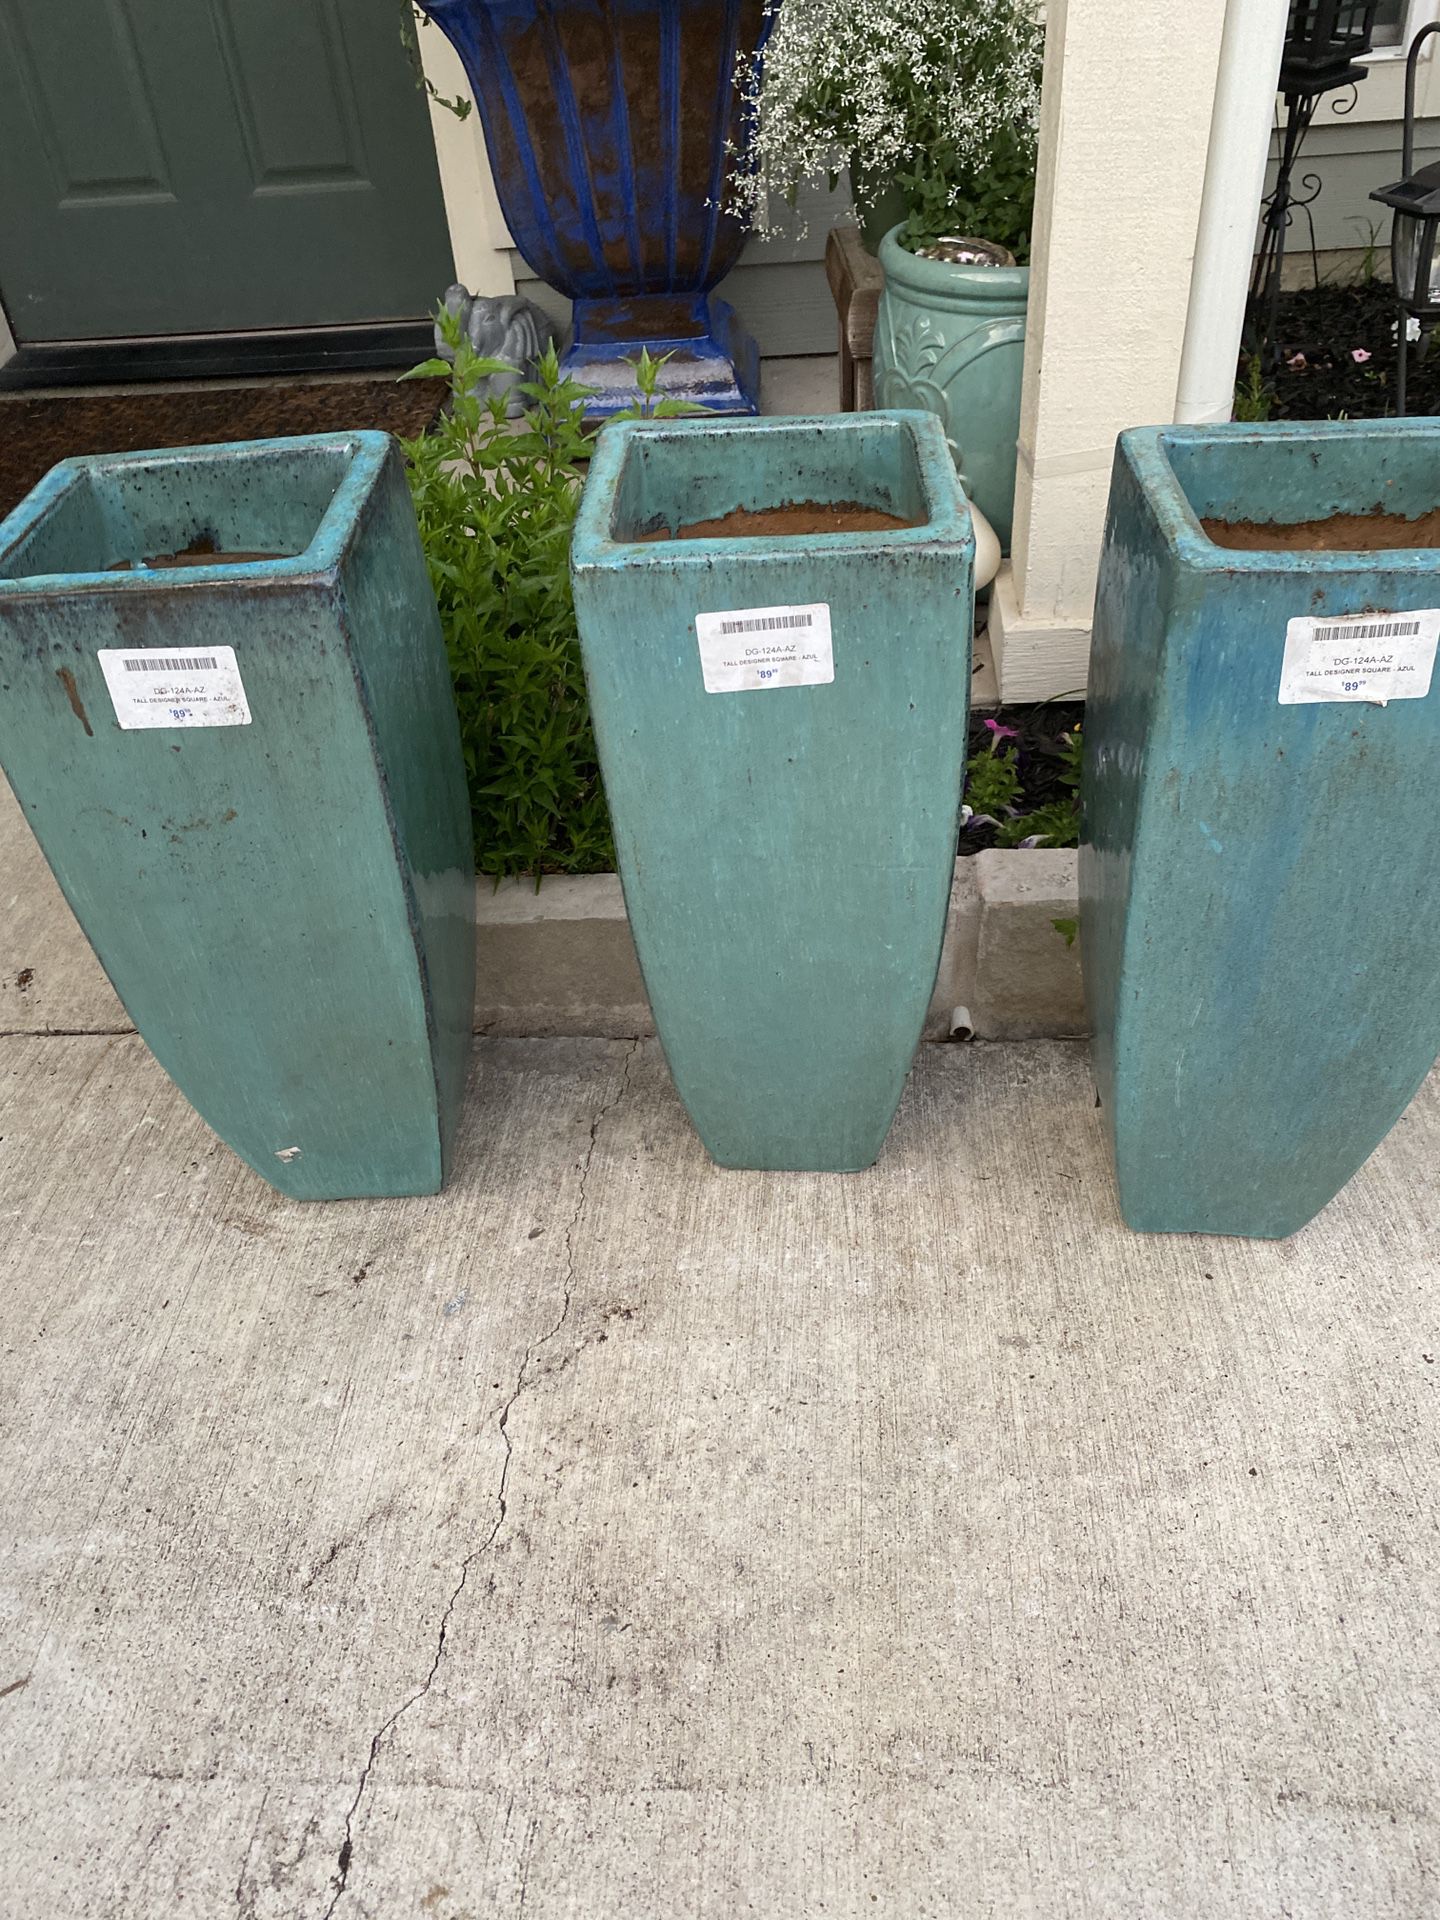 Brand new planters set of 3 / 23 inches tall by 9 inches wide